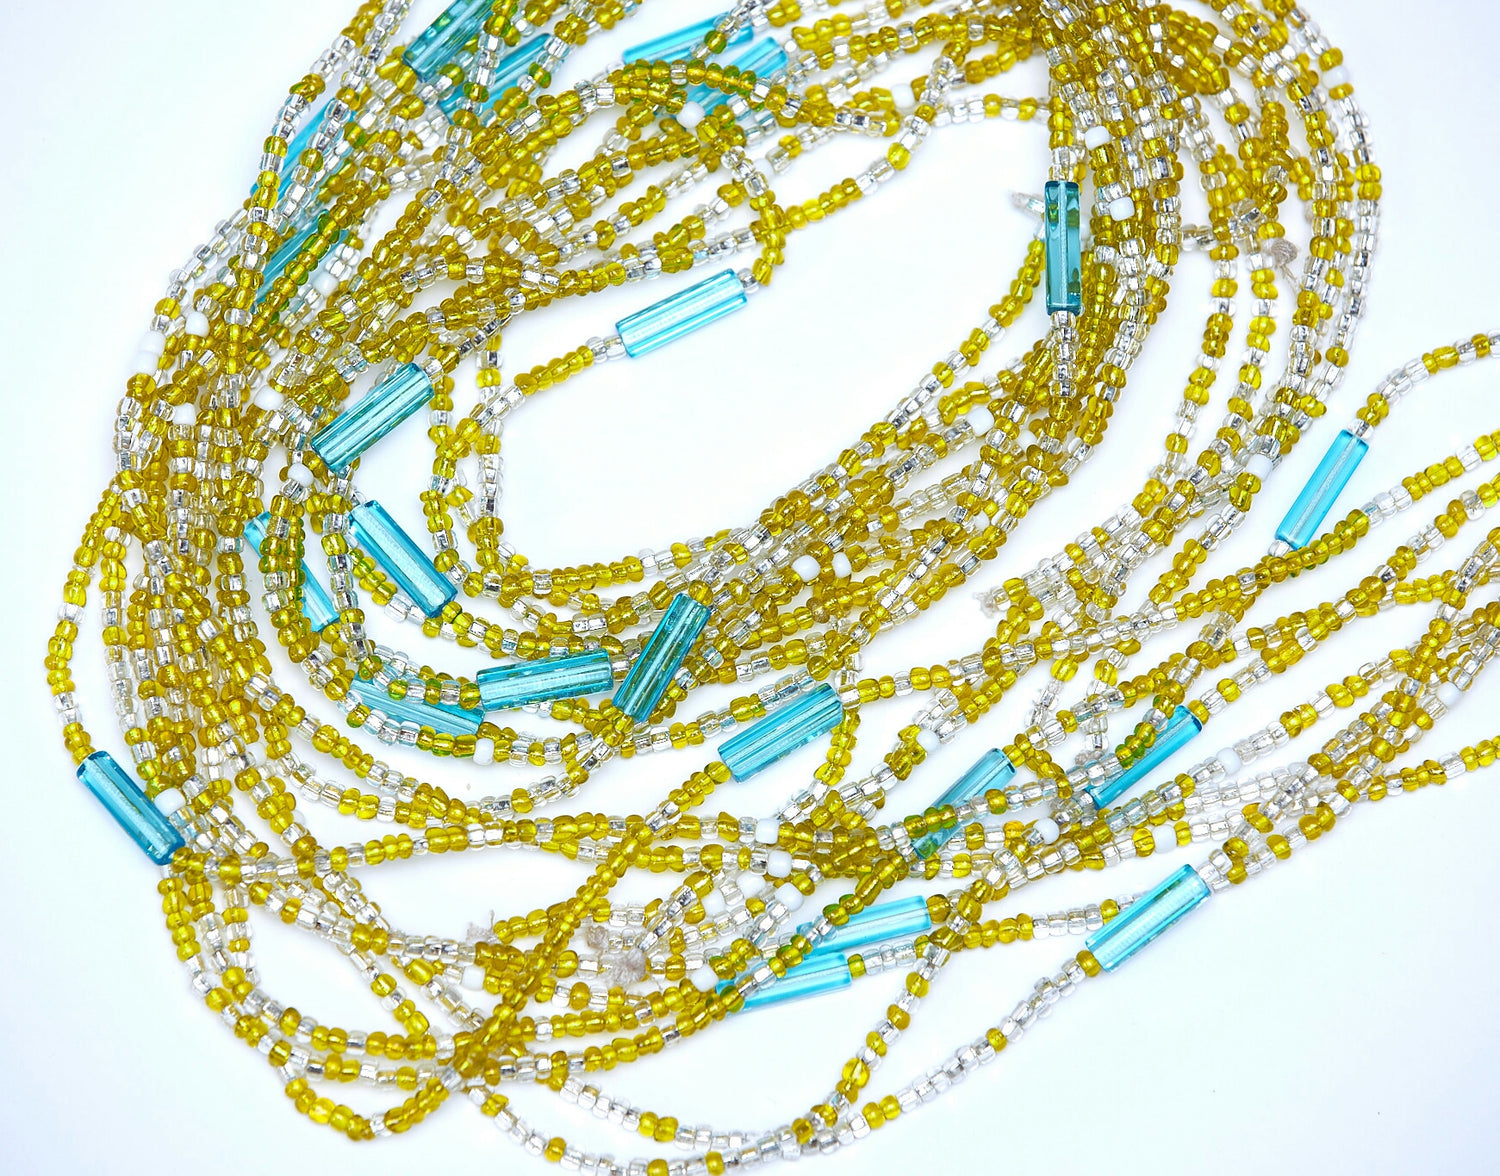 45 Inches Yellow And Clear Crystal Glass Beads With Sea Blue Pebble Bar Tie On Waist Beads